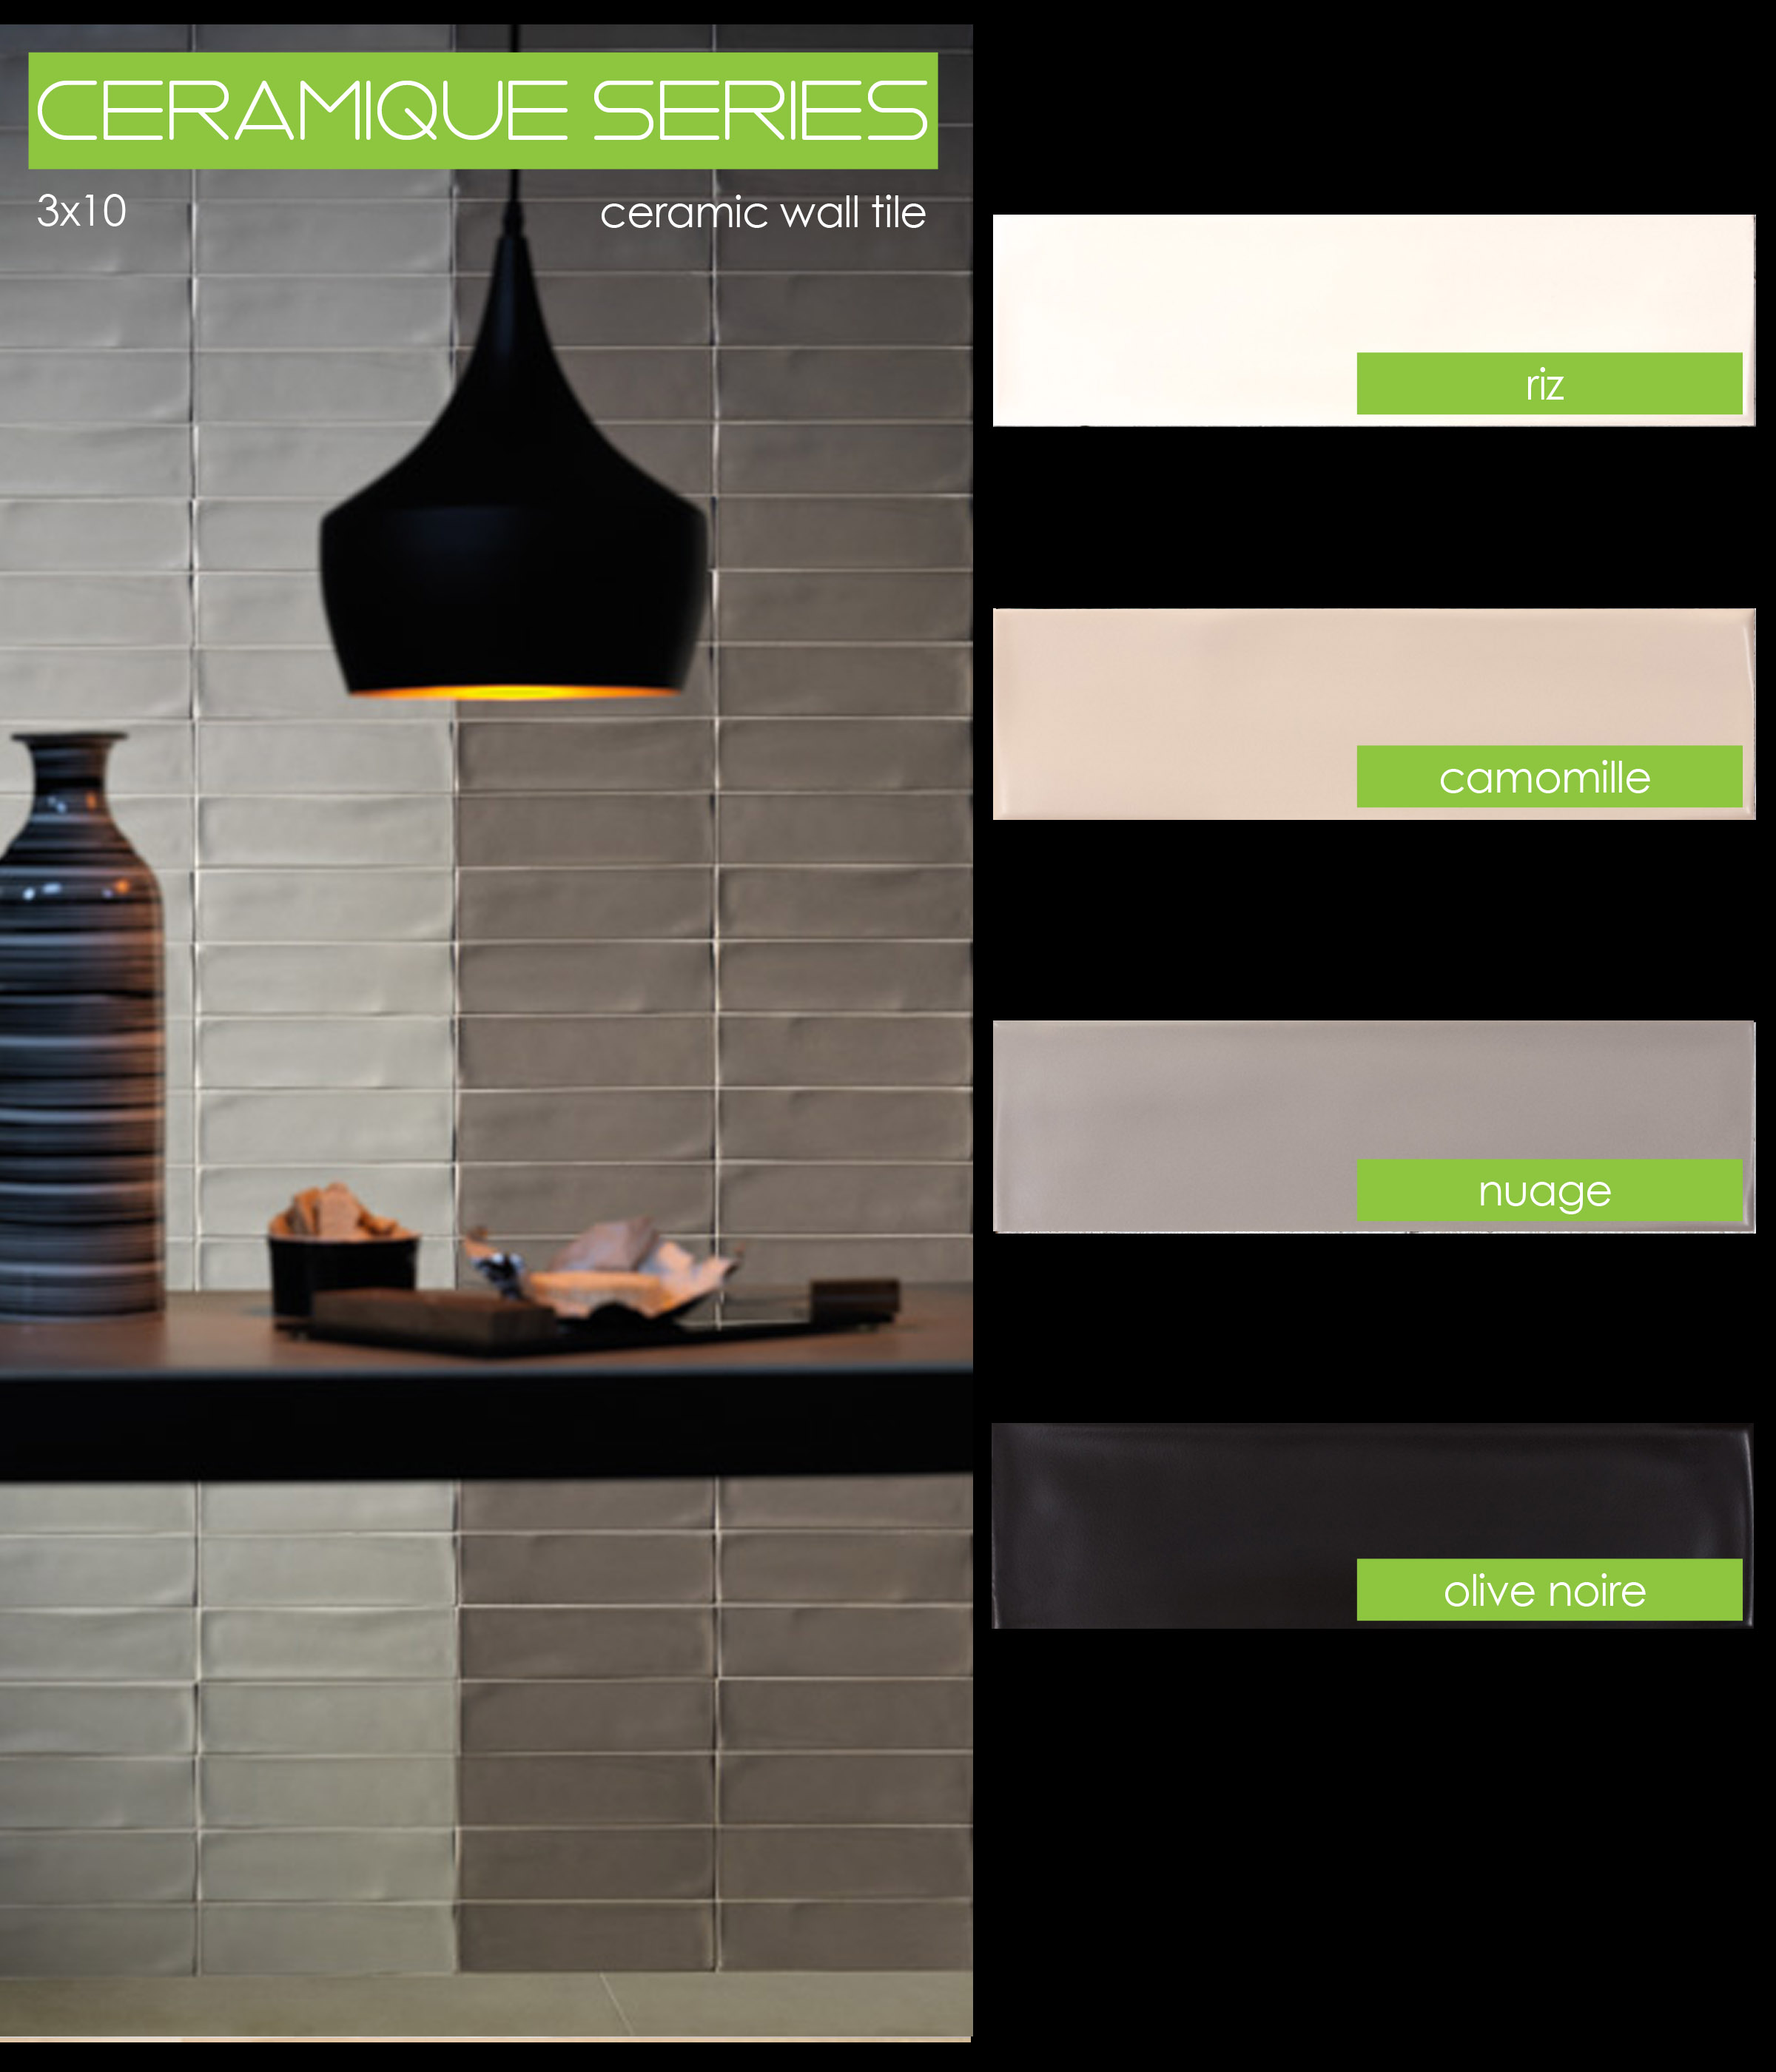 Ceramique Series ceramic wall tile 3x10 Tierra Sol hand molded wall tile riz camomille nuage olive noire white cream taupe charcoal